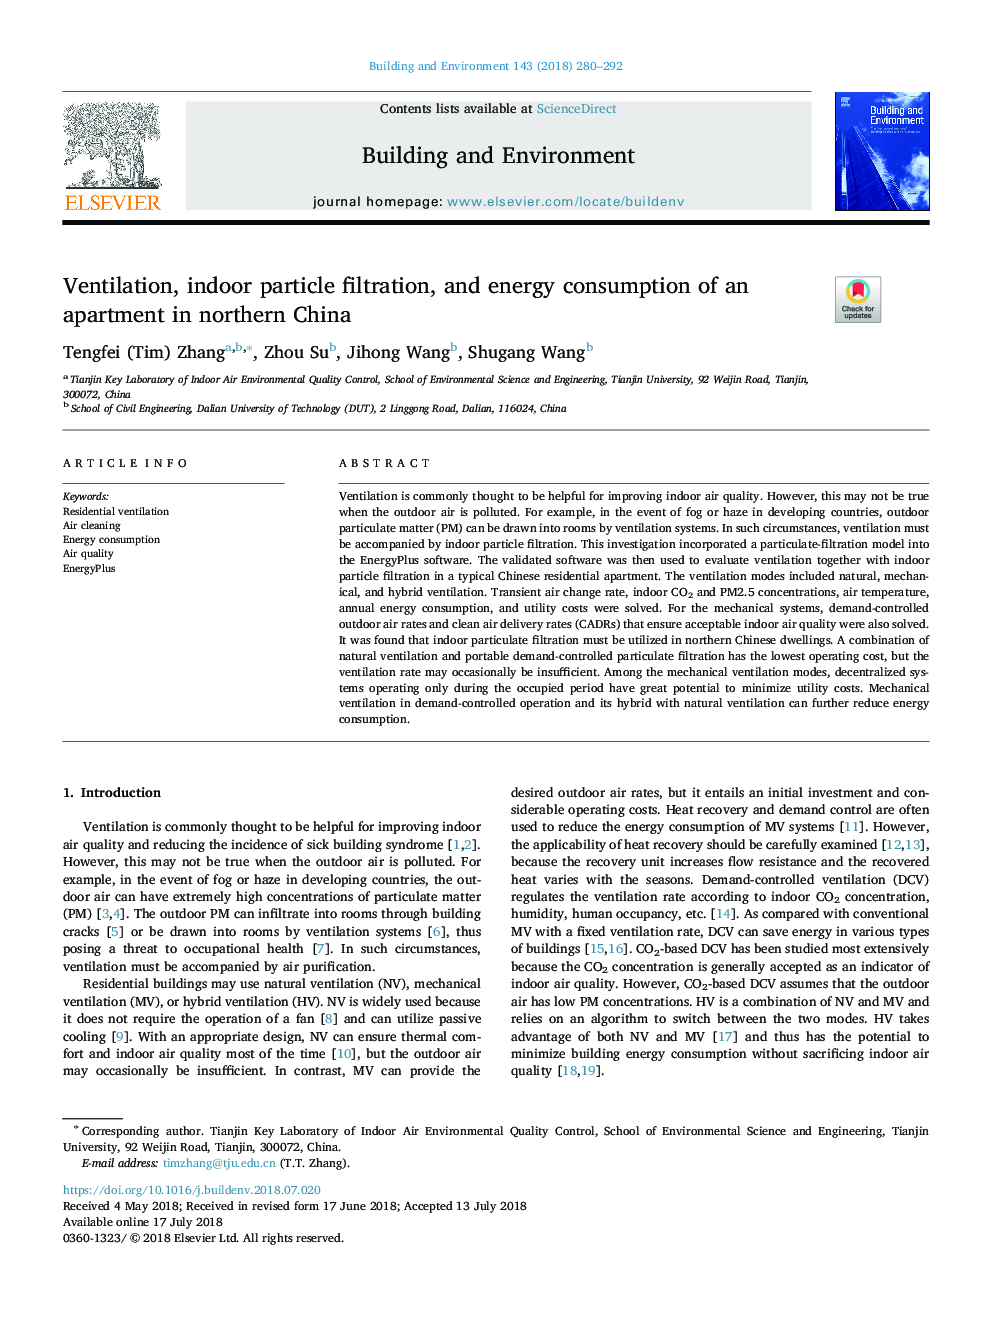 Ventilation, indoor particle filtration, and energy consumption of an apartment in northern China